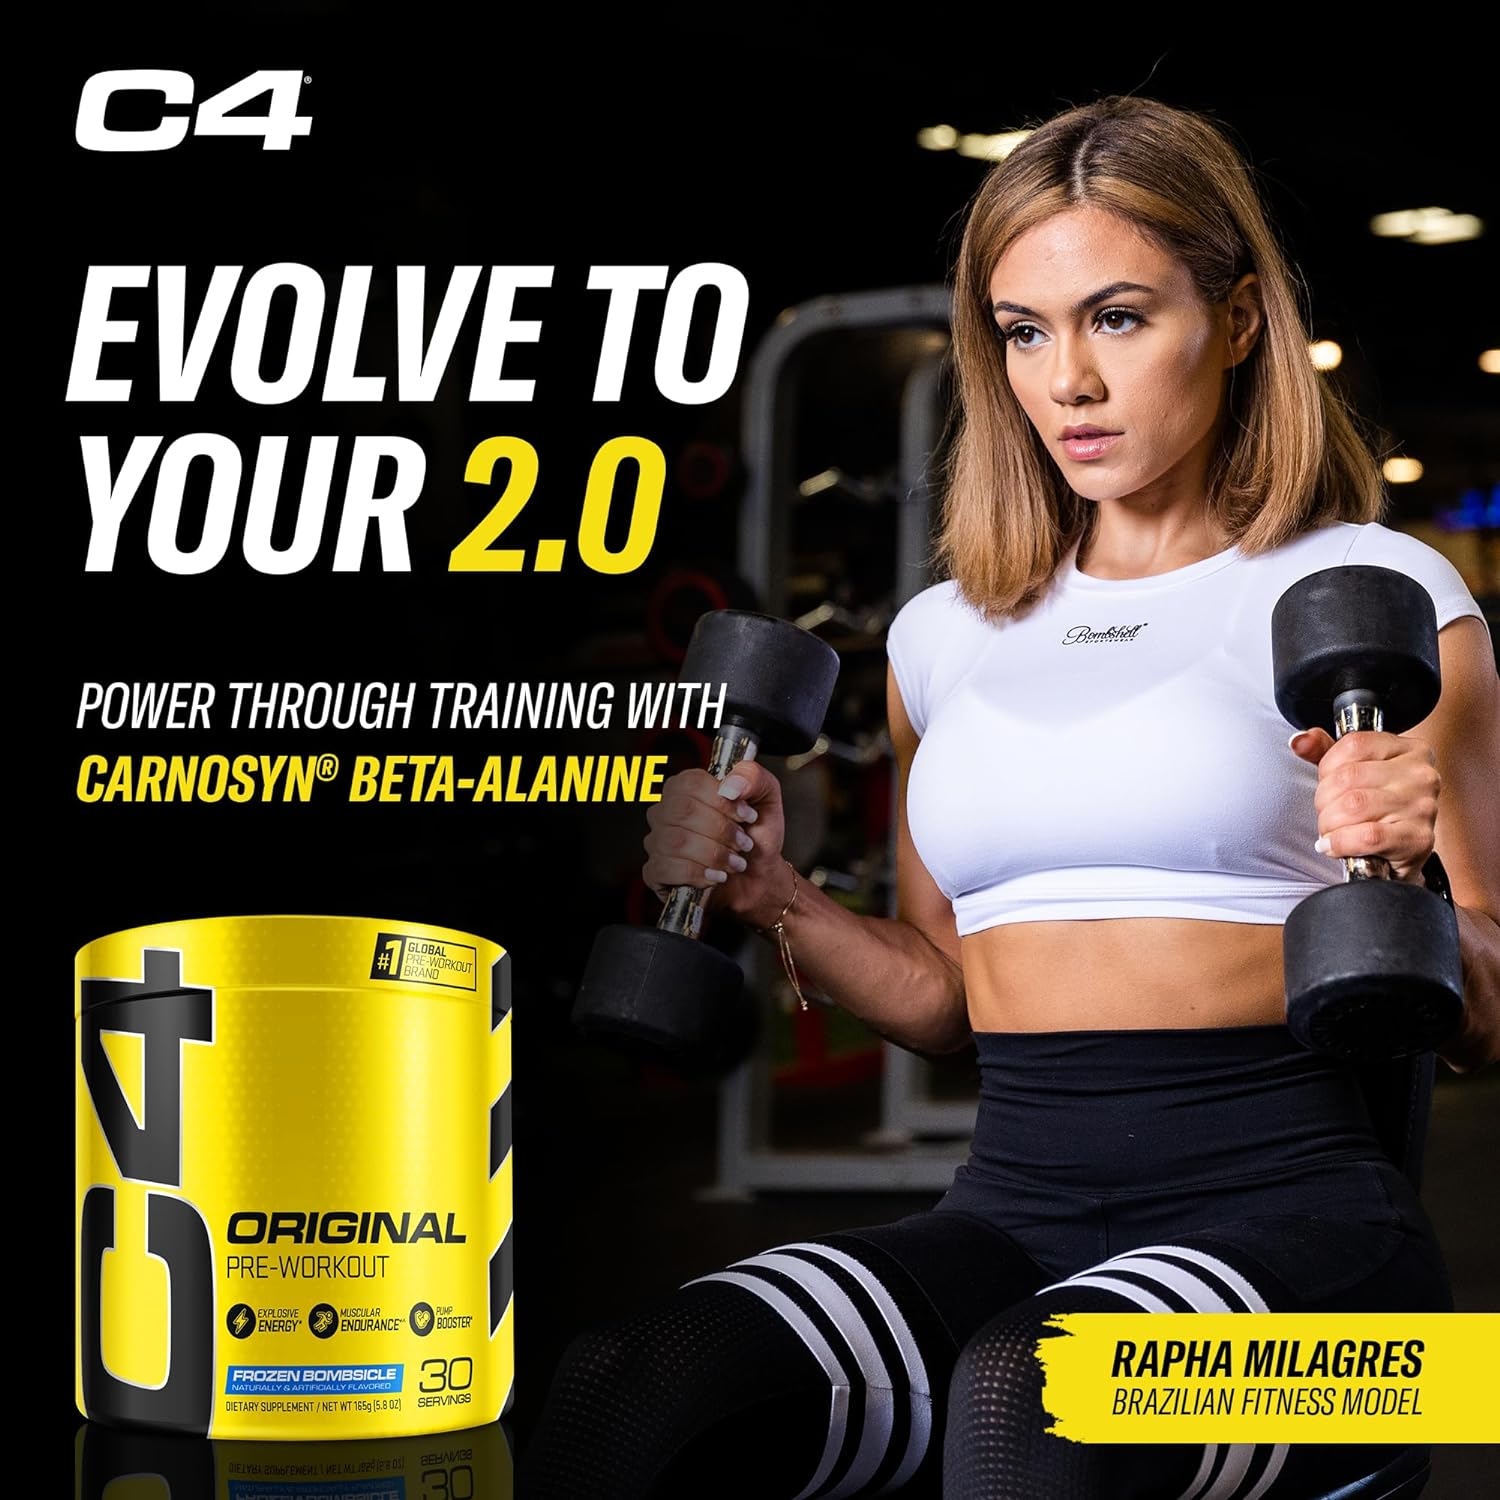 Cellucor C4 Original Pre Workout Powder Frozen Bombsicle Sugar Free Preworkout Energy for Men & Women 150mg Caffeine + Beta Alanine + Creatine - 30 Servings (Packaging May Vary) : Health & Household